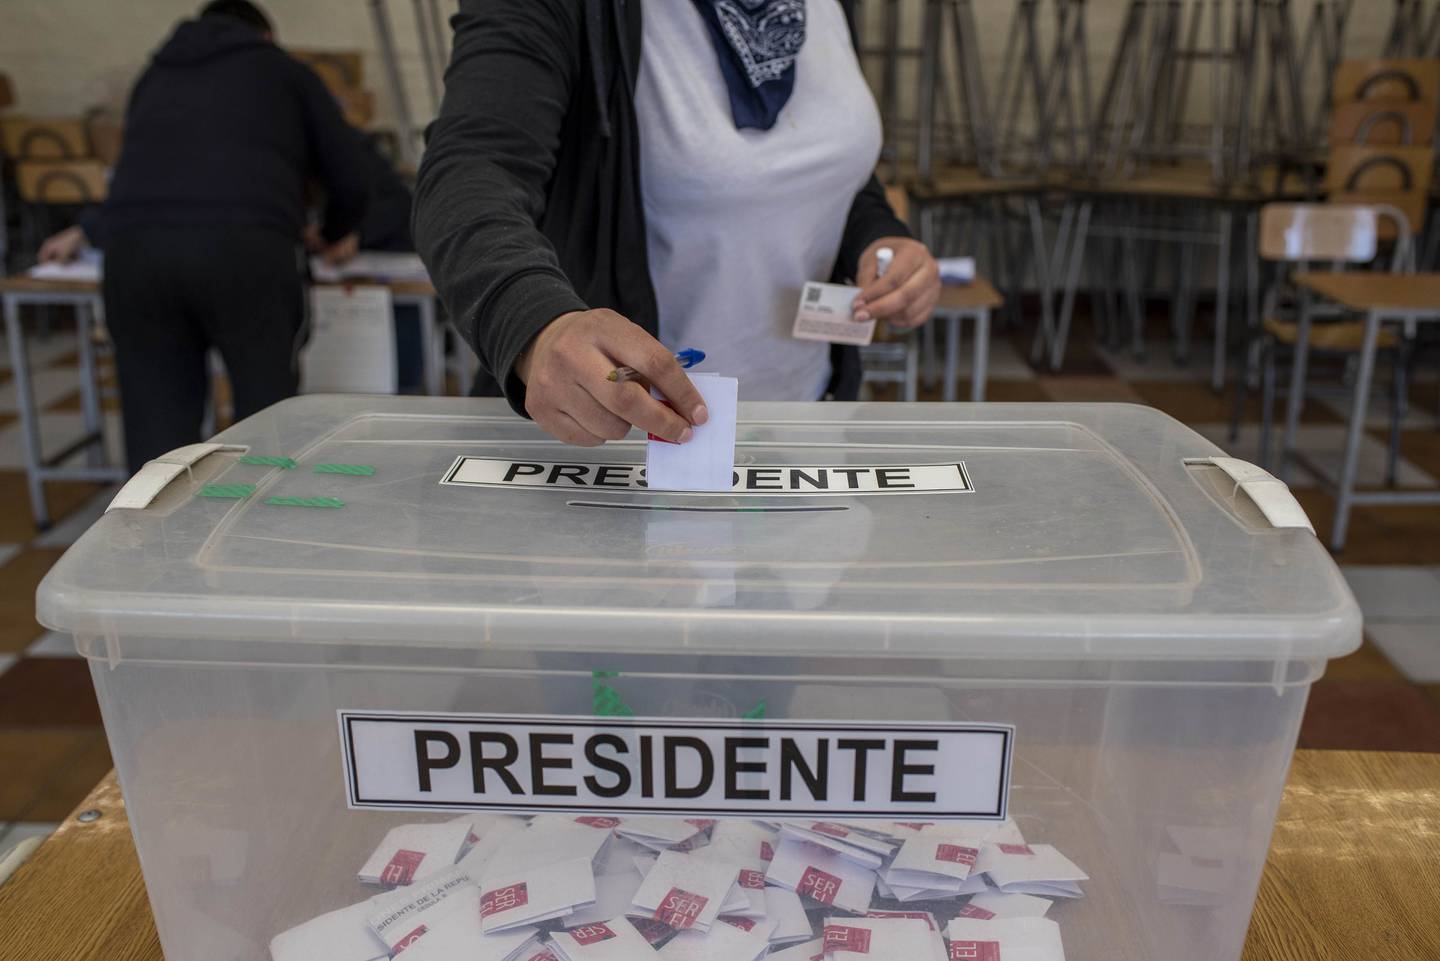 A voter casts a ballot at a polling station during primary presidential elections in Santiago, Chile, on Sunday, July 18, 2021.